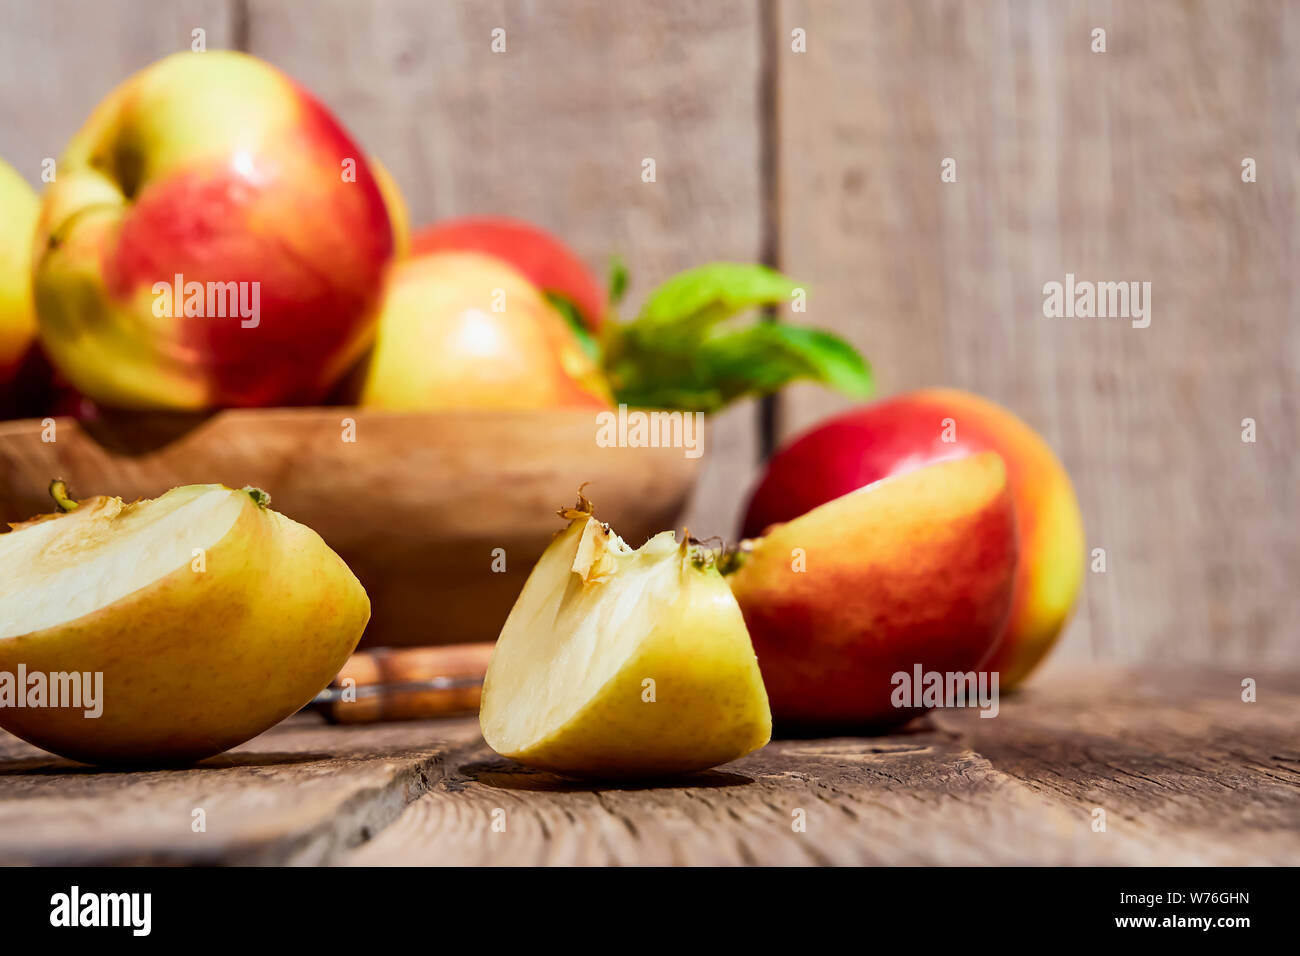 Fresh red apples with green leaves on a wooden old table. On a wooden background with sliced apple. Free space for text. soft focus Stock Photo